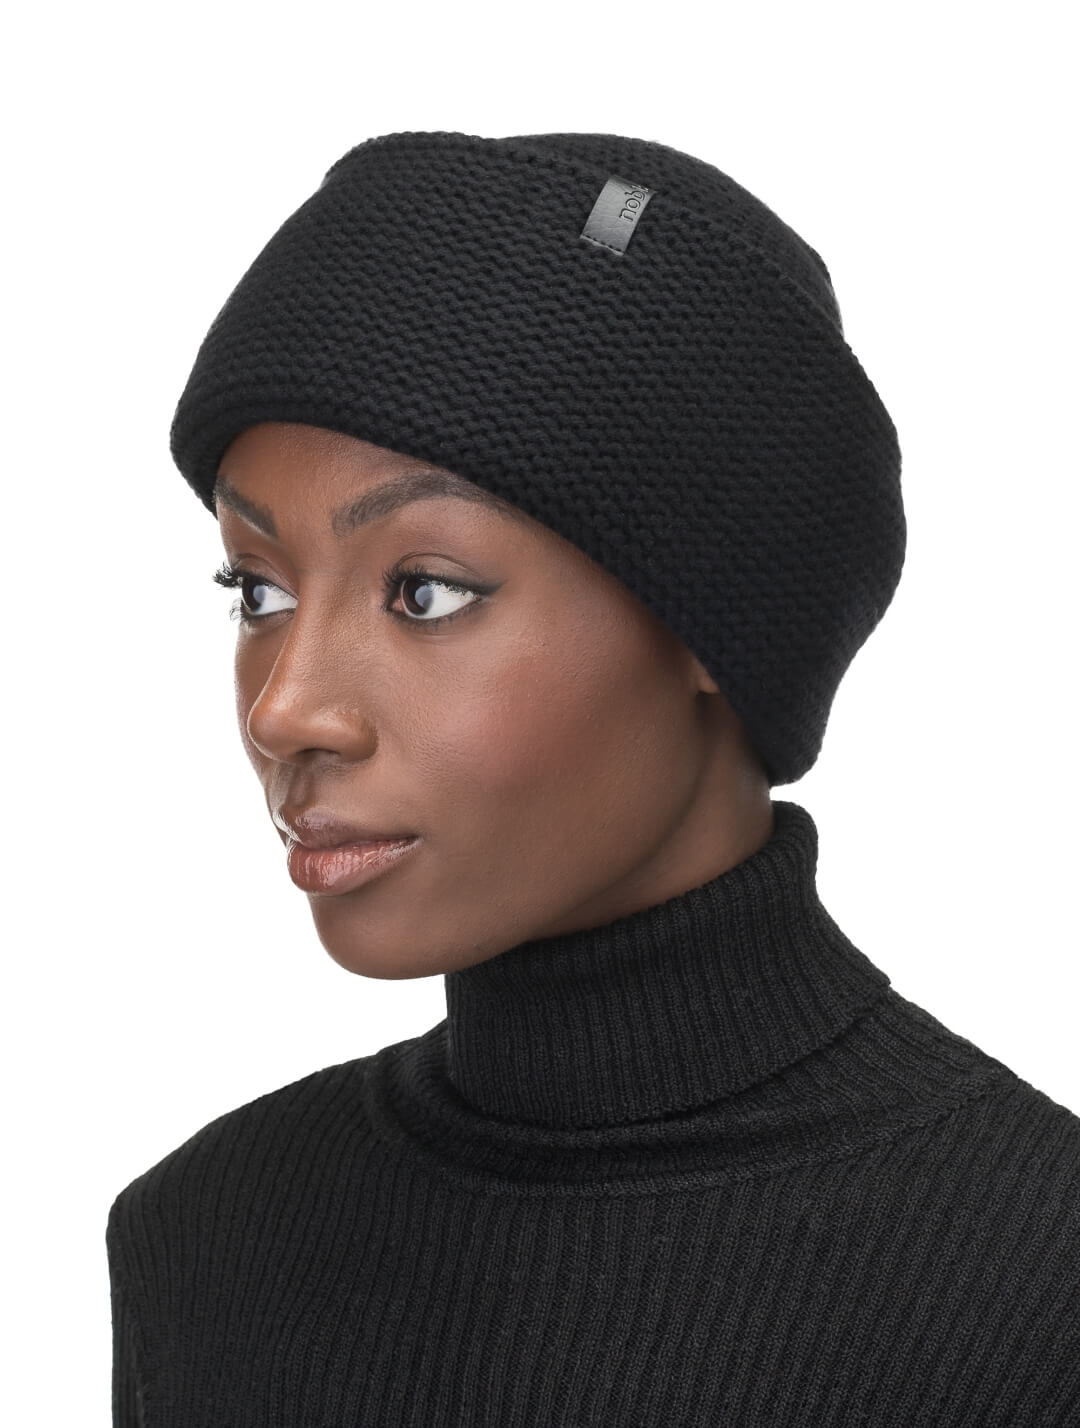 Mira Unisex Purl Knit Beanie in superfine merino wool and cashmere, and Nobis leather label at cuff, in Black